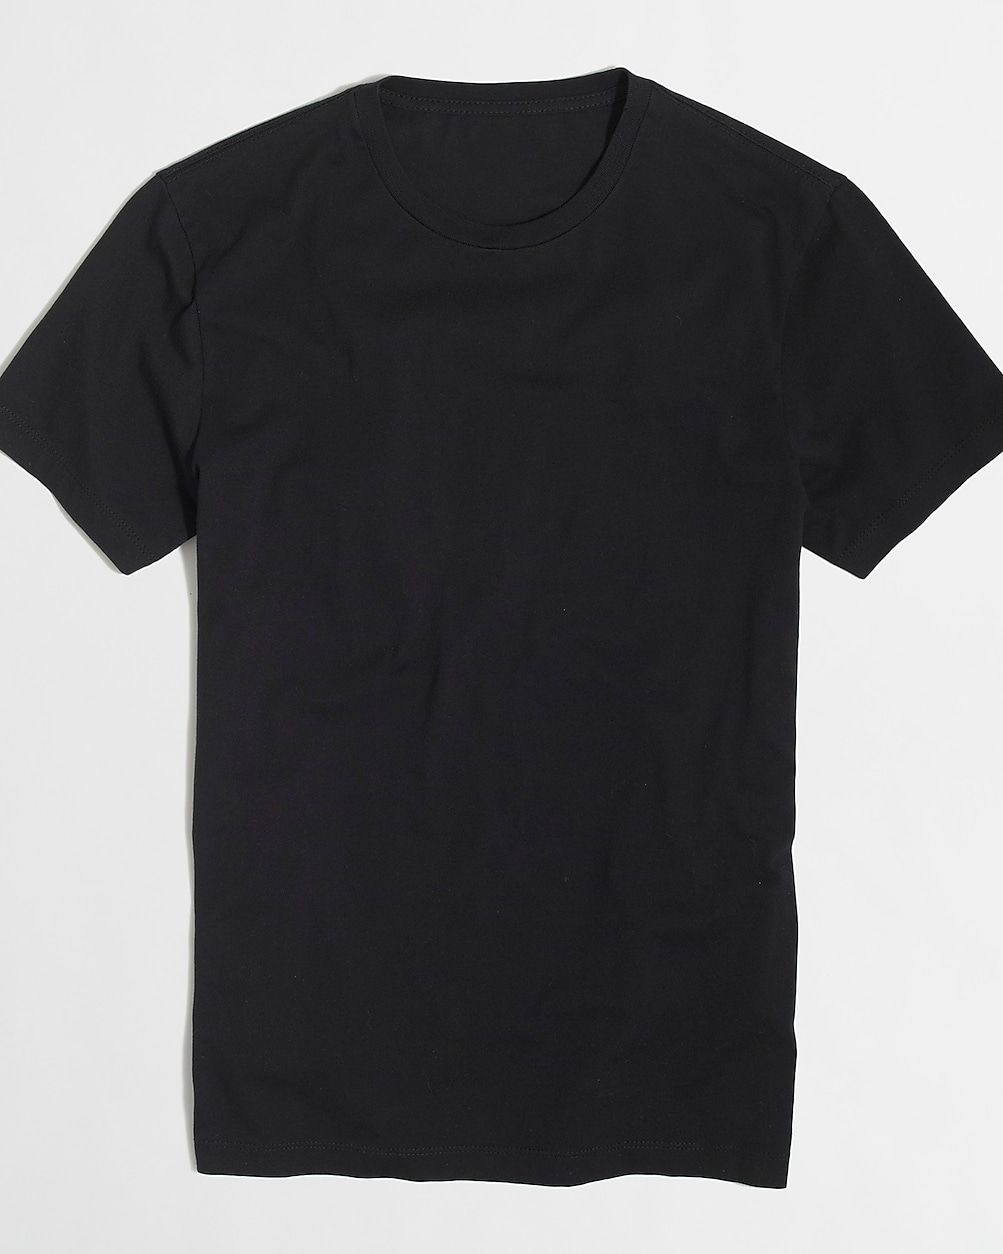 Washed jersey tee | J.Crew Factory